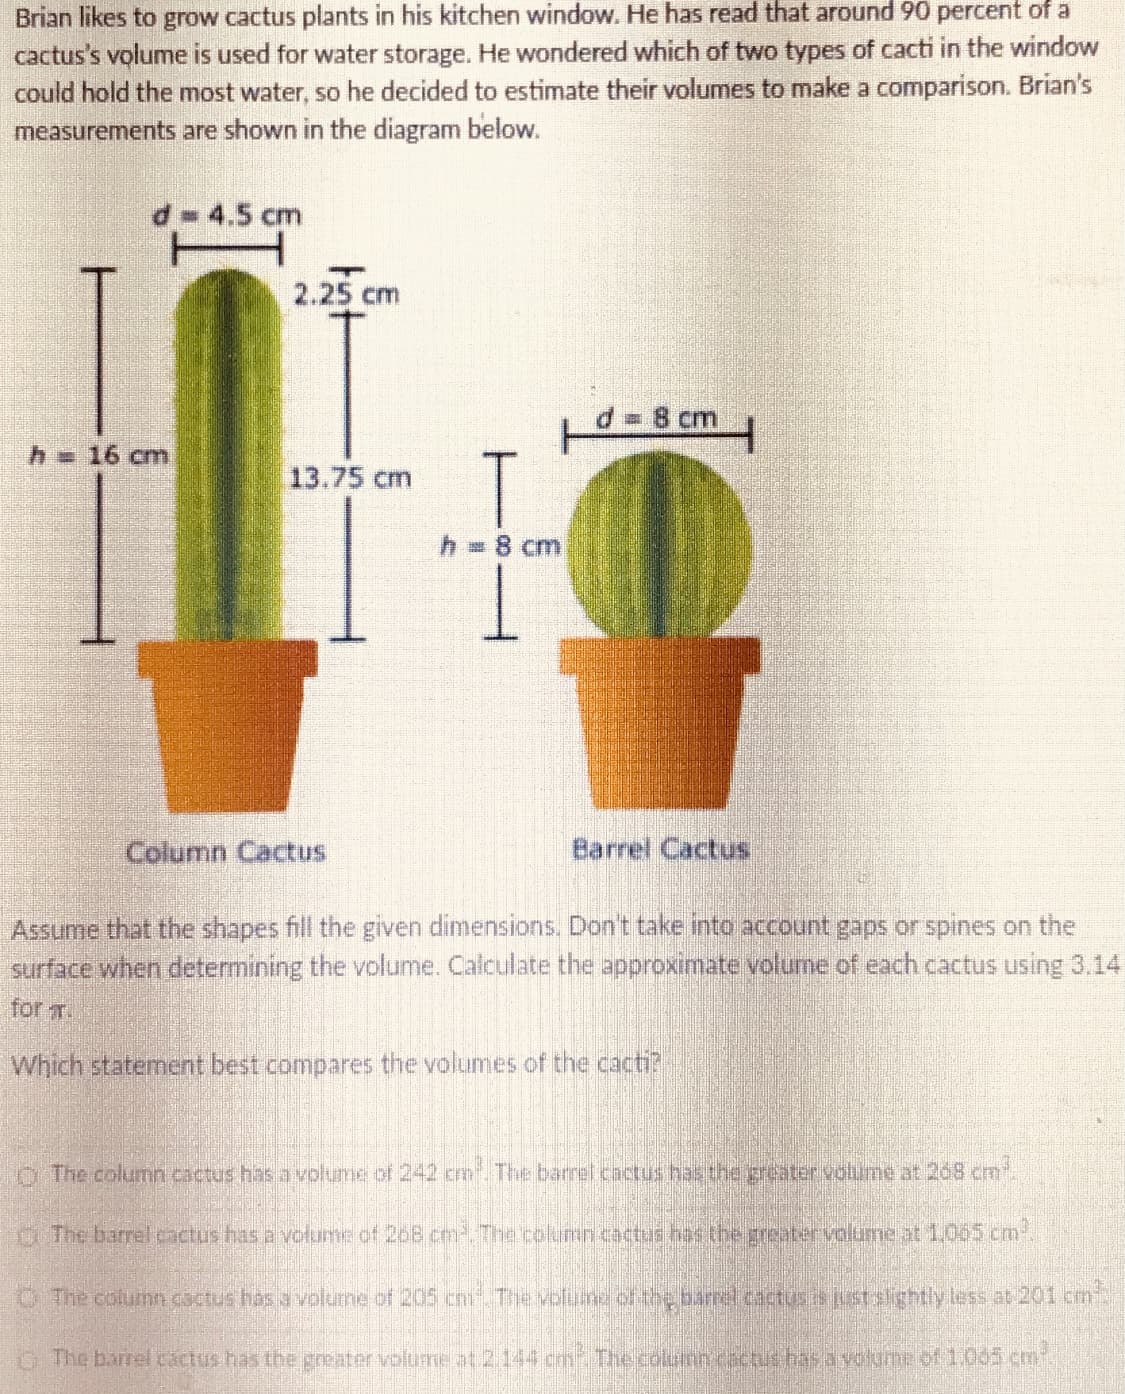 Brian likes to grow cactus plants in his kitchen window. He has read that around 90 percent of a
cactus's volume is used for water storage. He wondered which of two types of cacti in the window
could hold the most water, so he decided to estimate their volumes to make a comparison. Brian's
measurements are shown in the diagram below.
d= 4.5 cm
2.25 cm
D3D8 cm
h=16 cm
13.75 cm
h =8 cm
Column Cactus
Barrel Cactus
Assume that the shapes fill the given dimensions. Don't take into account gaps or spines on the
surface when determining the volume. Calculate the approximate volume of each cactus using 3,14
for .
Which statement best compares the volumes of the cacti?
O The column cactus has a volume of 242 cm The barrel cactus has the greater volume at 268 cm
The barrel cactus has a votunme of 208 ce The column cactis has the greatervalume at 1.005 cm
O The column octus has a volune of 205 cn The volure of the barrel cactusis stalghtlyless at 201 cm
G The barrel cáctus has the greater volume at 2.144 cm Thecolunncactic has ayolume of 1.065 cm
